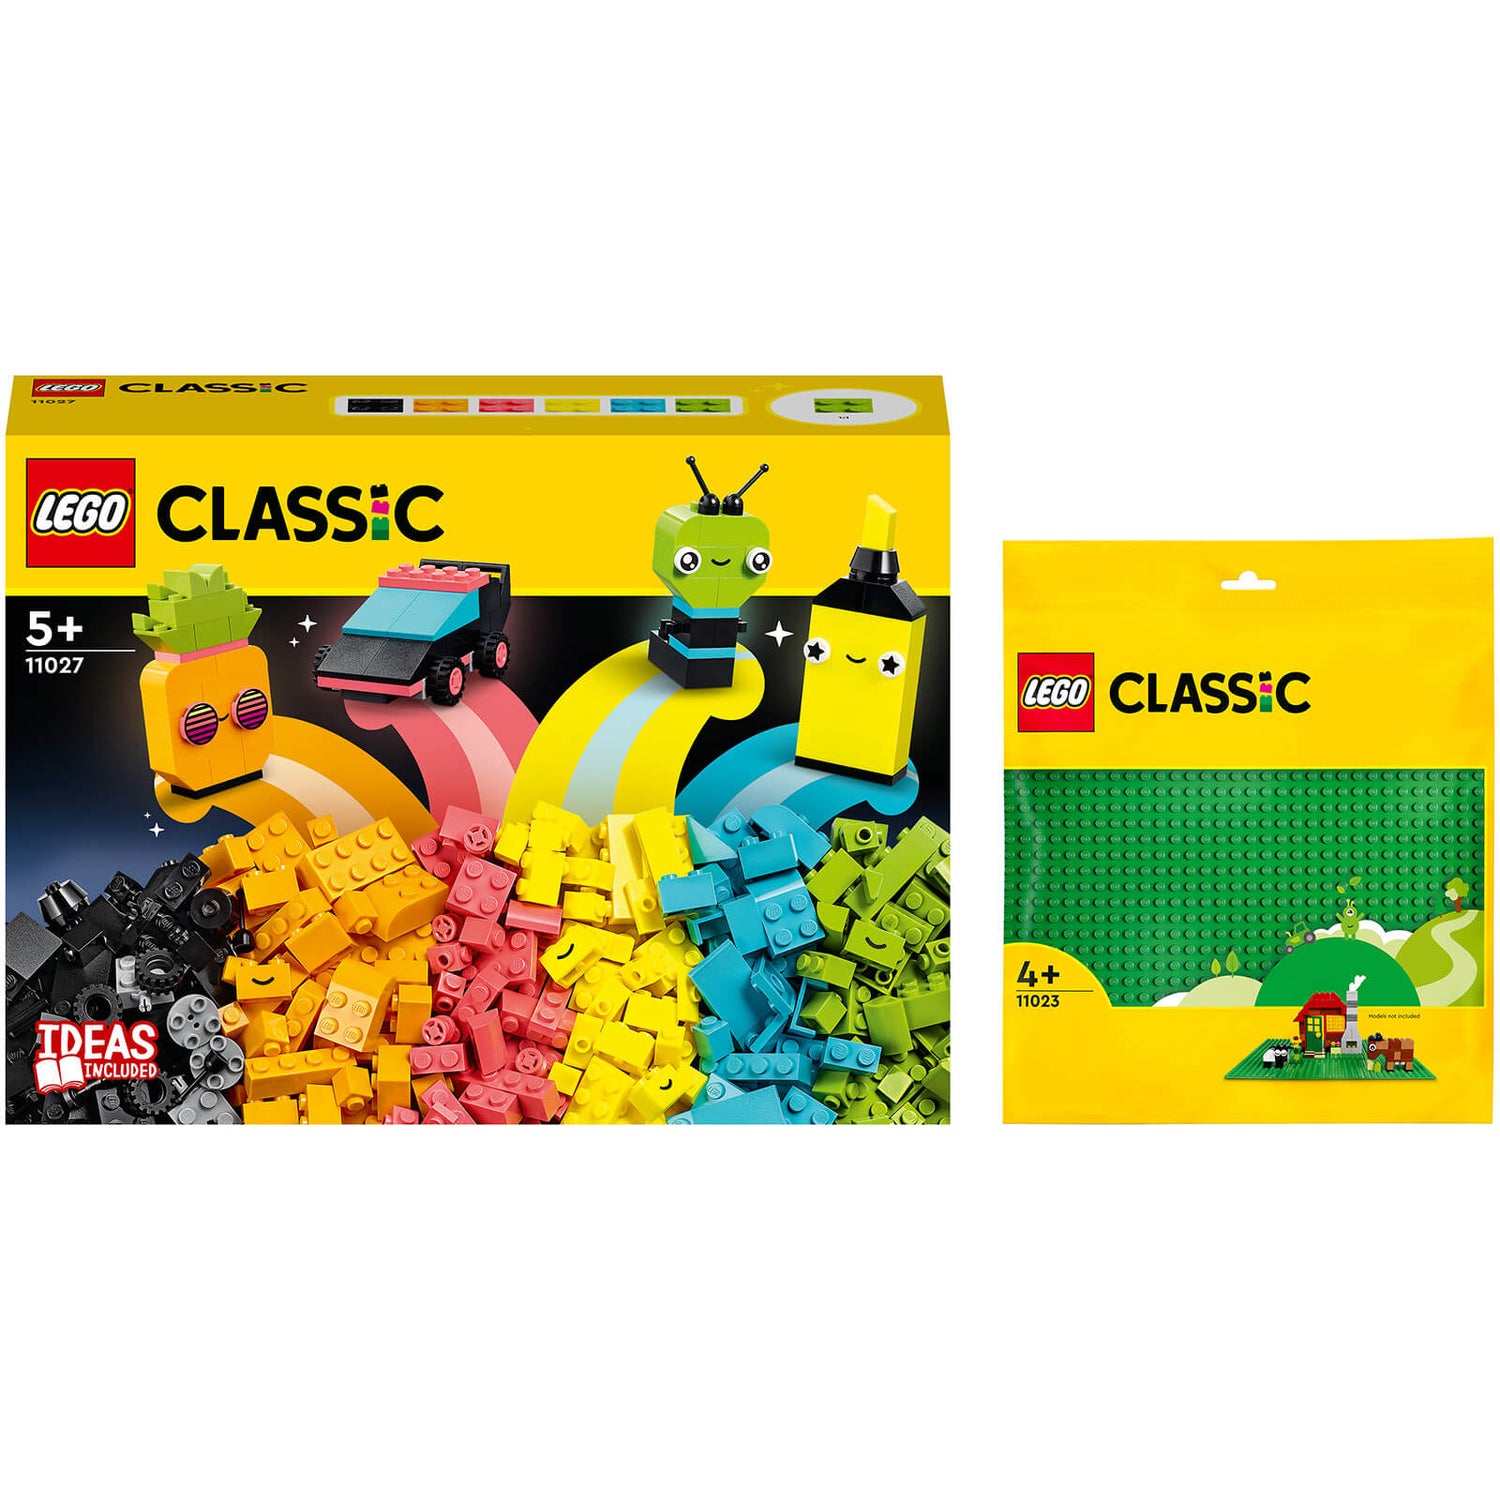 LEGO Classic: WE Value Pack Easter 1HY 2023 (66745)